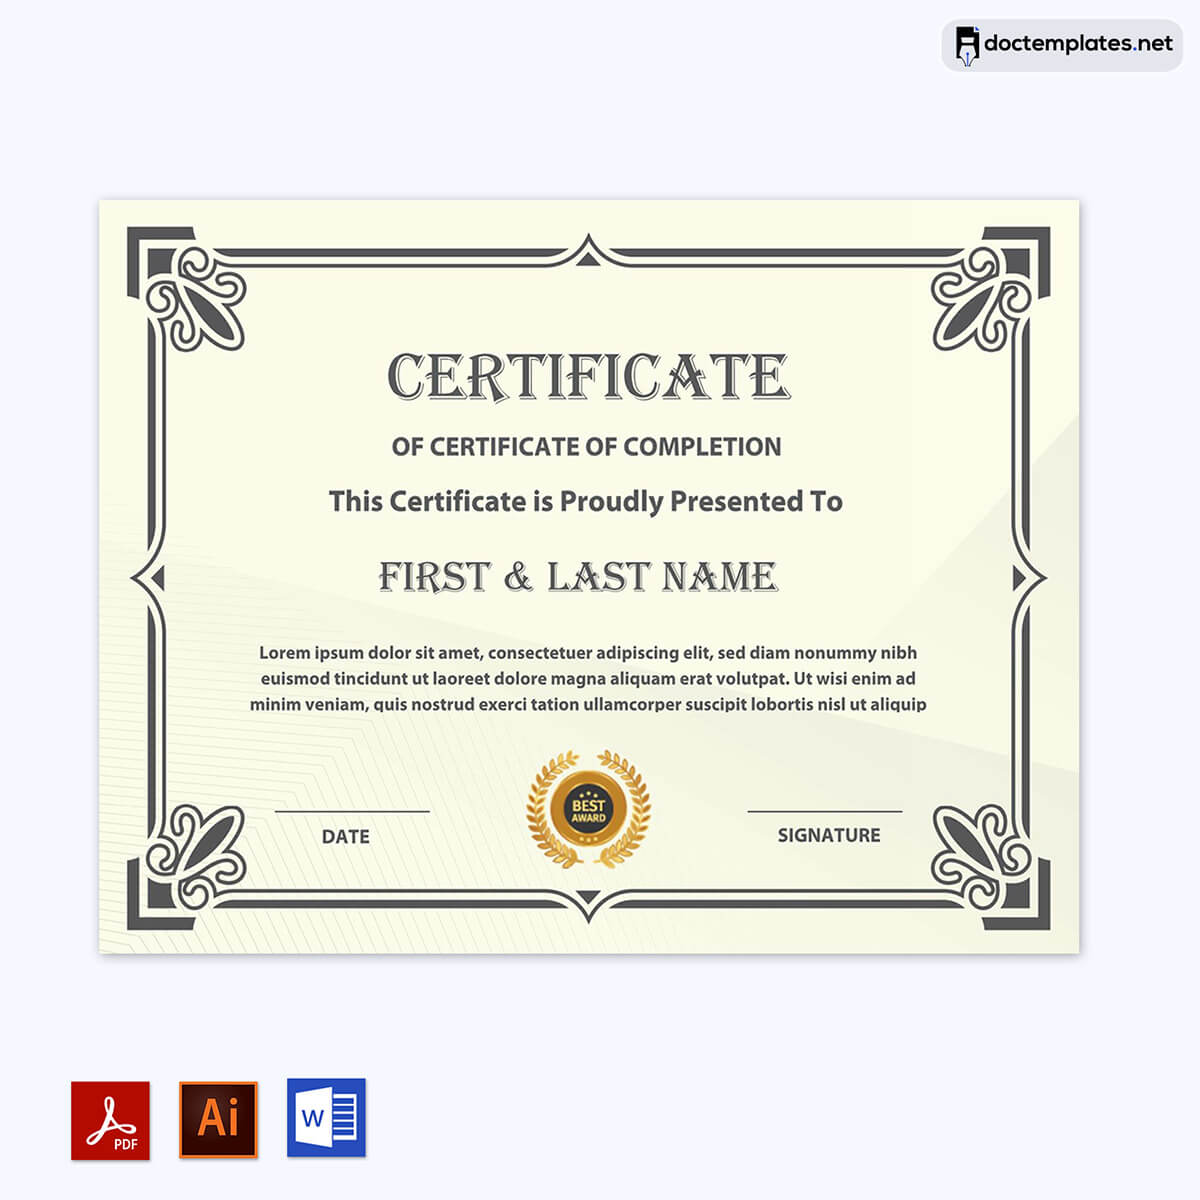 
certificate of completion template free download